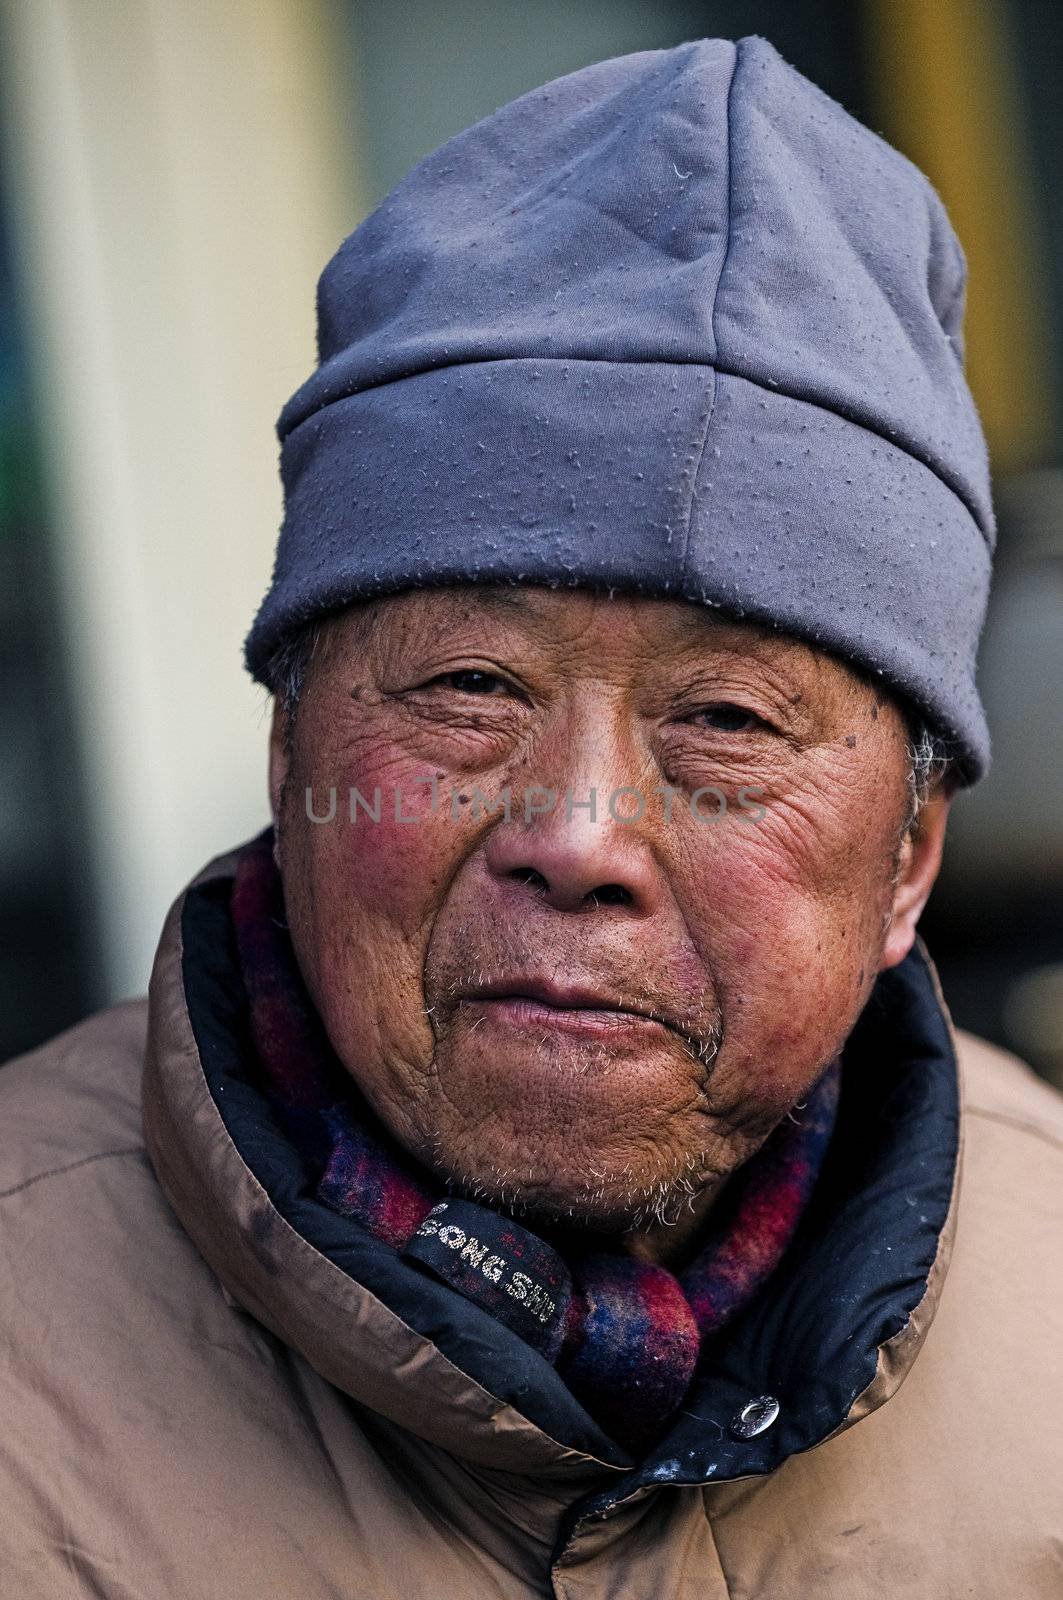 Portrait of old Chinese man in Shanghai China